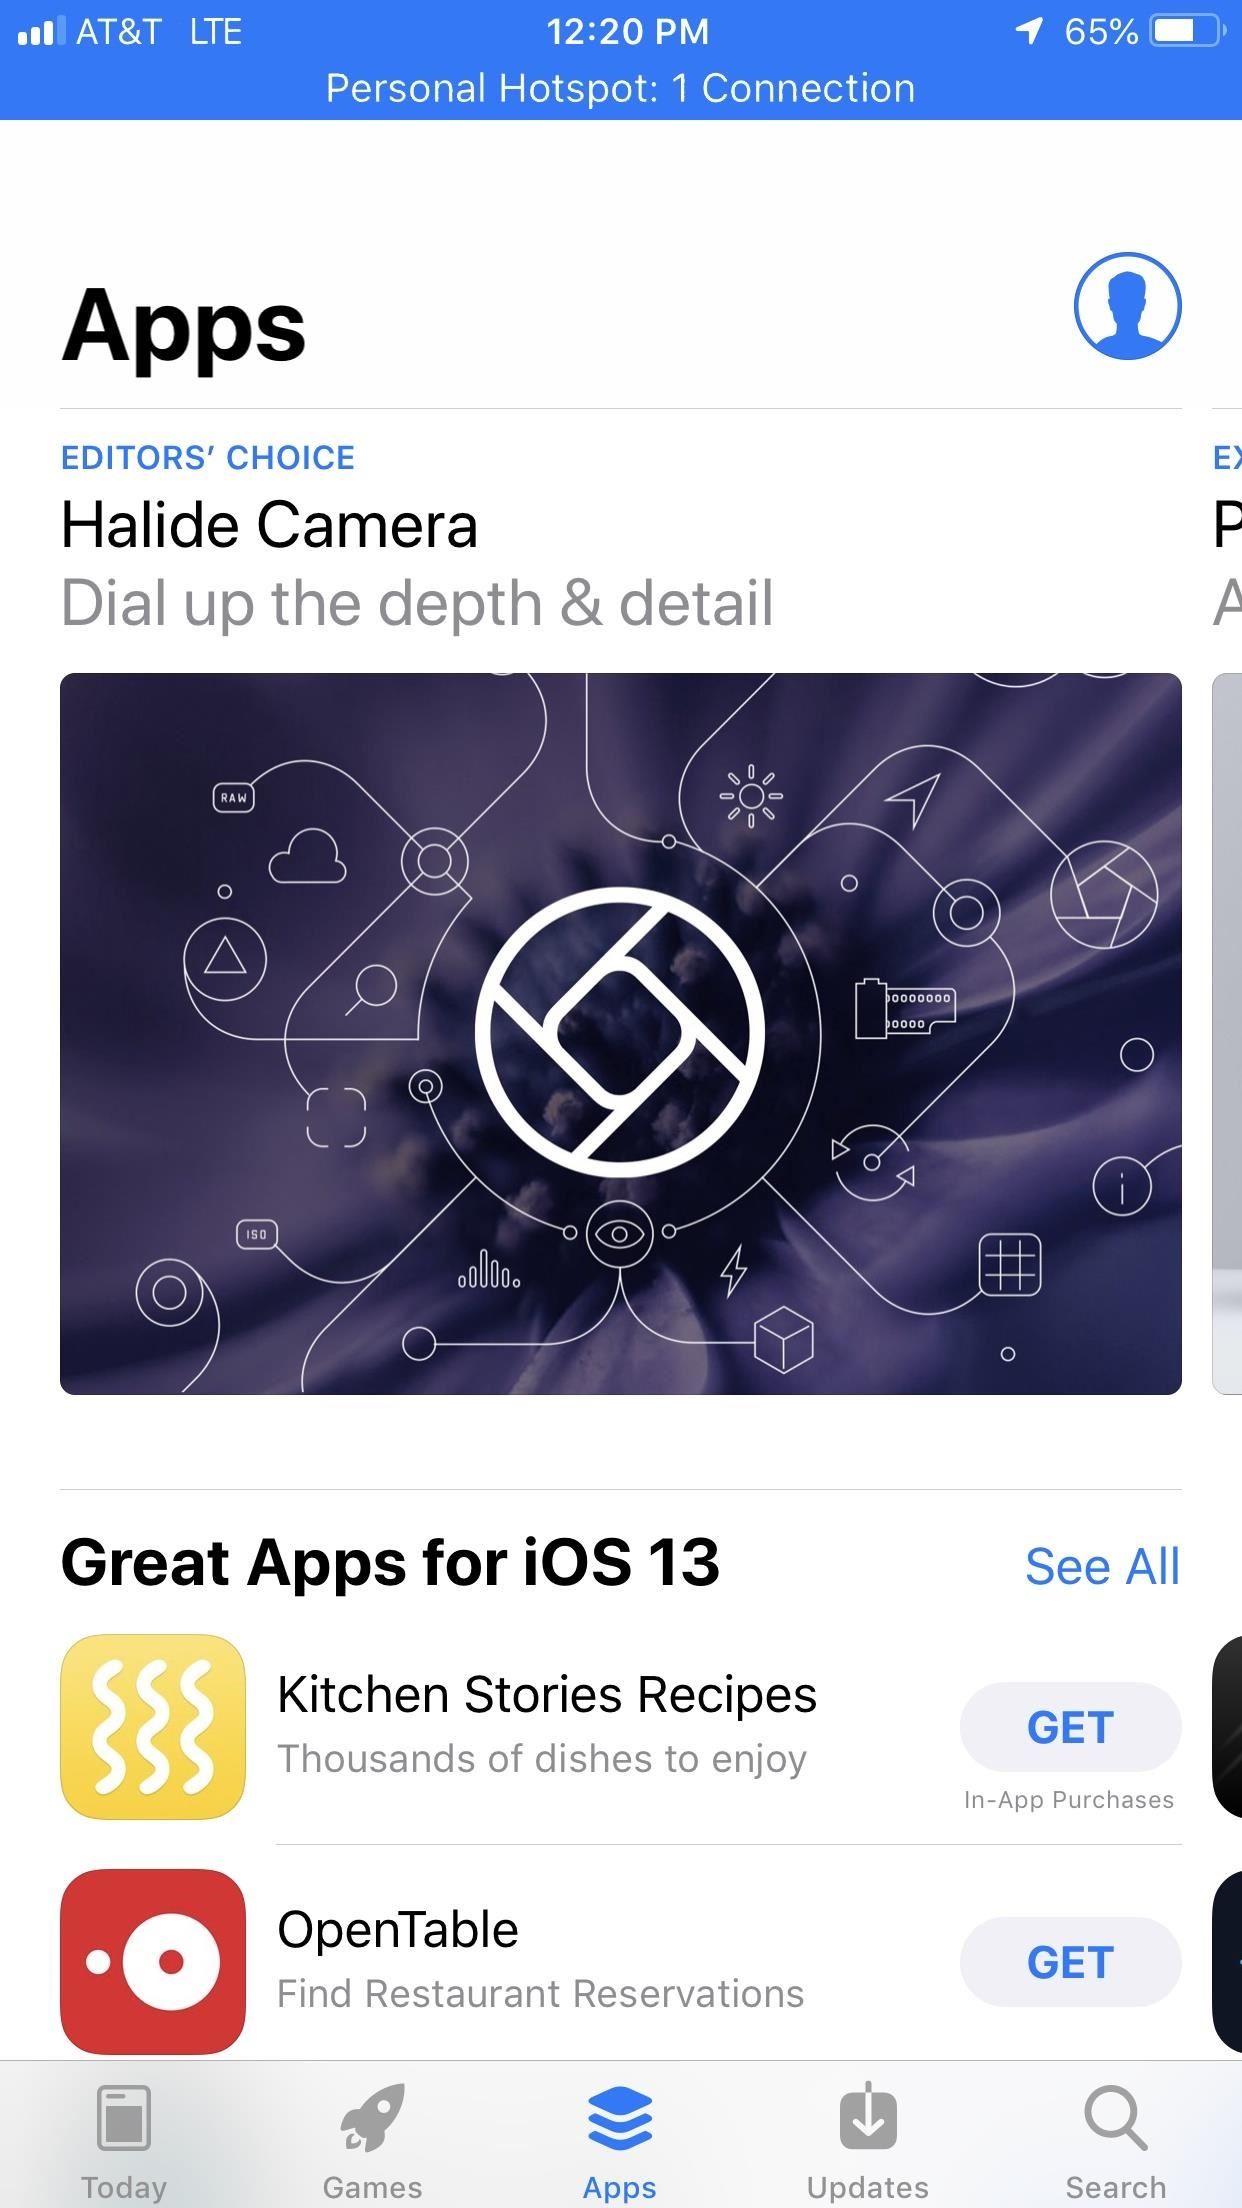 Still Using an Older iPhone? This iOS 13 Feature Gives You Back Some Screen Real Estate